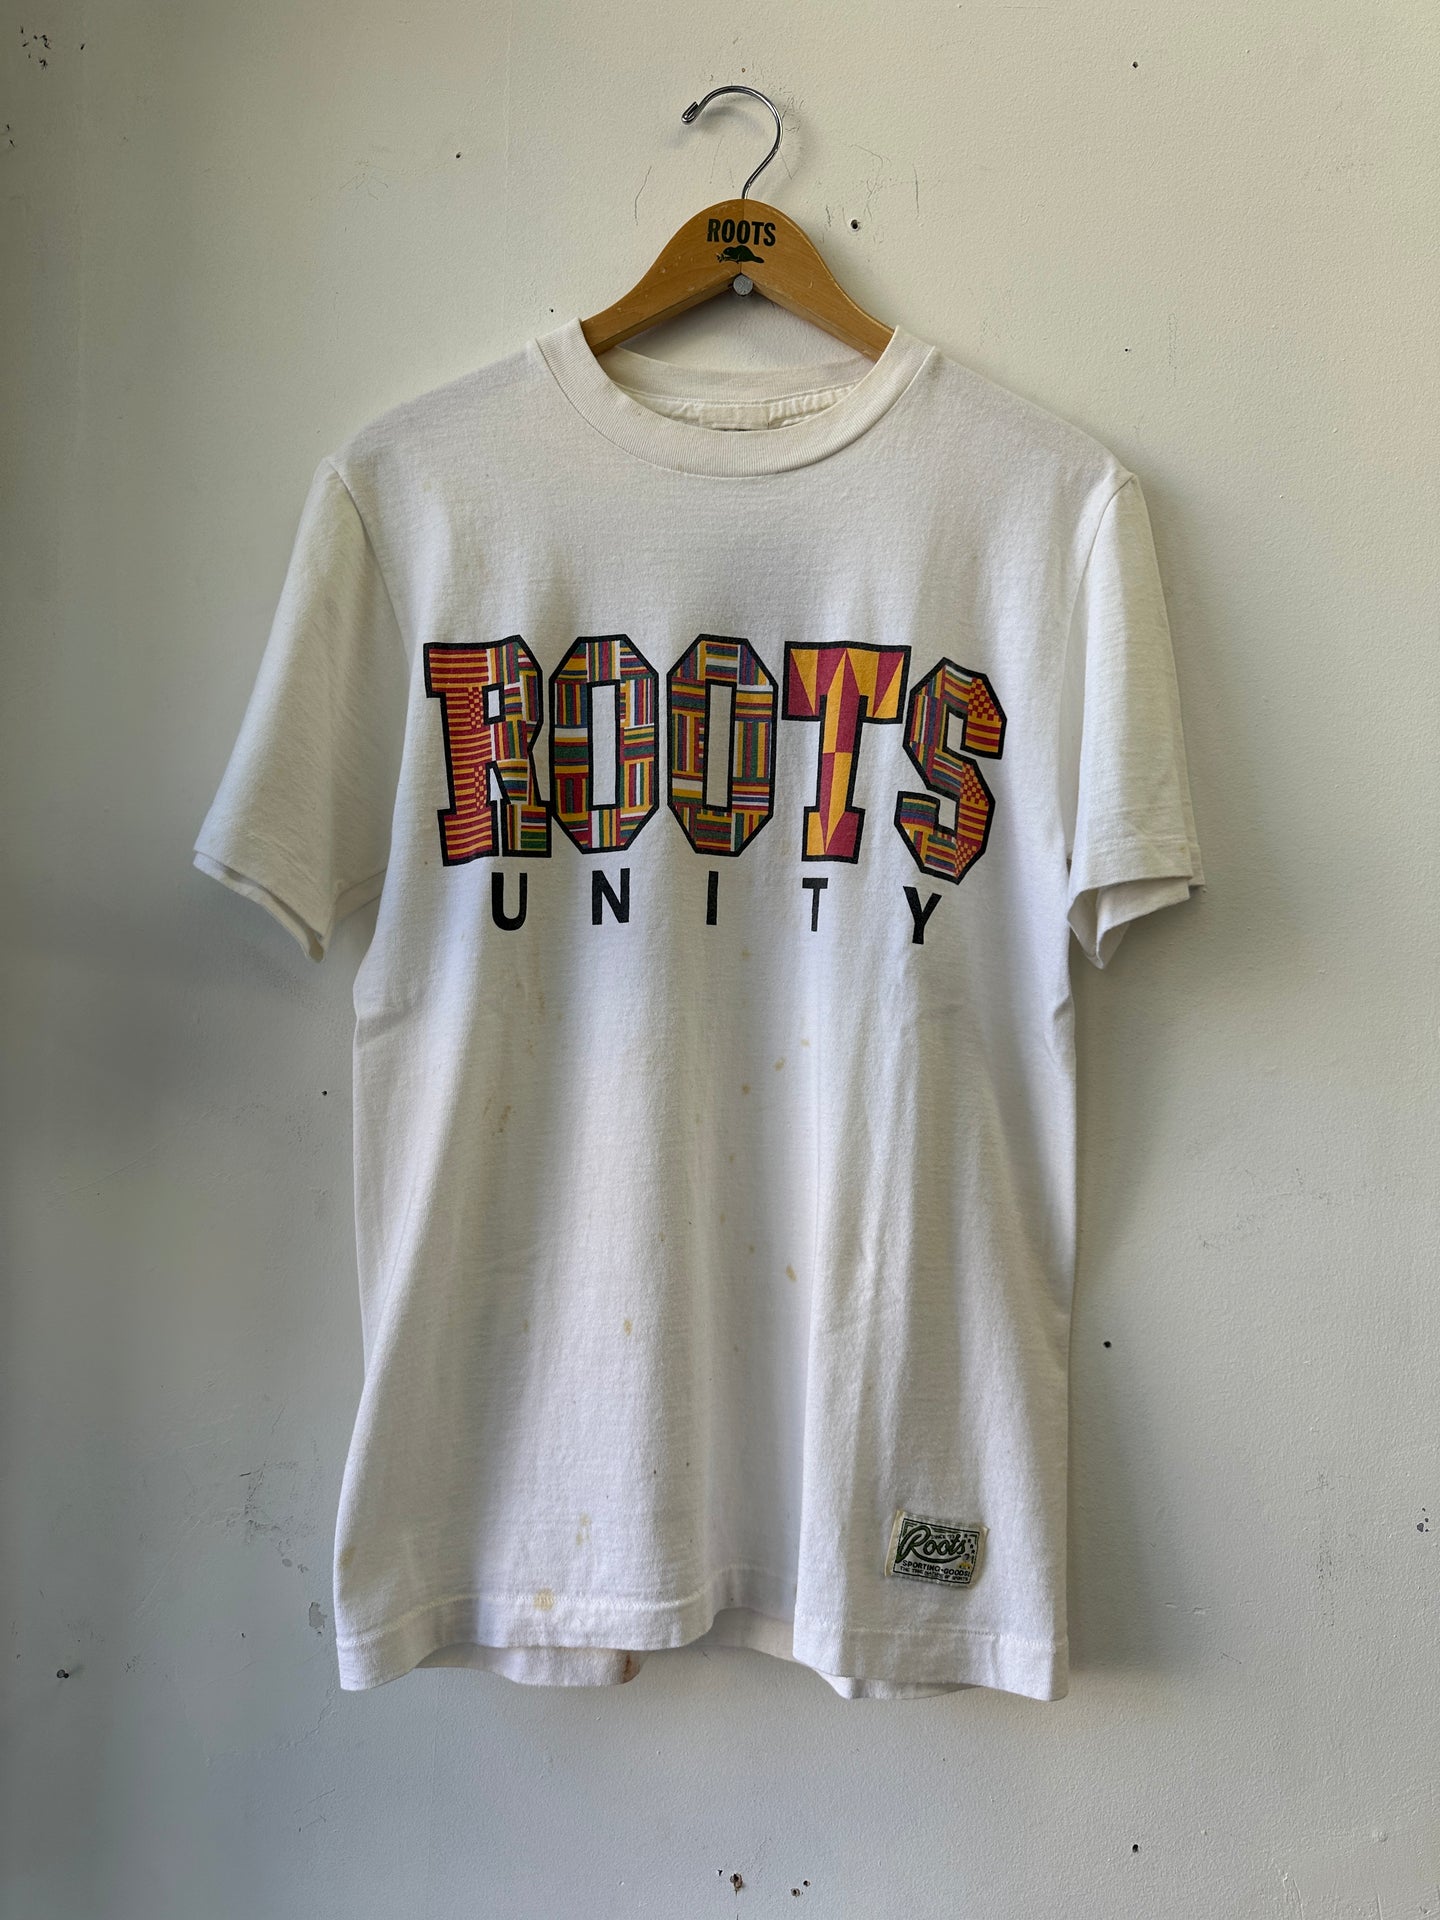 90s Roots Athletic Unity Tee